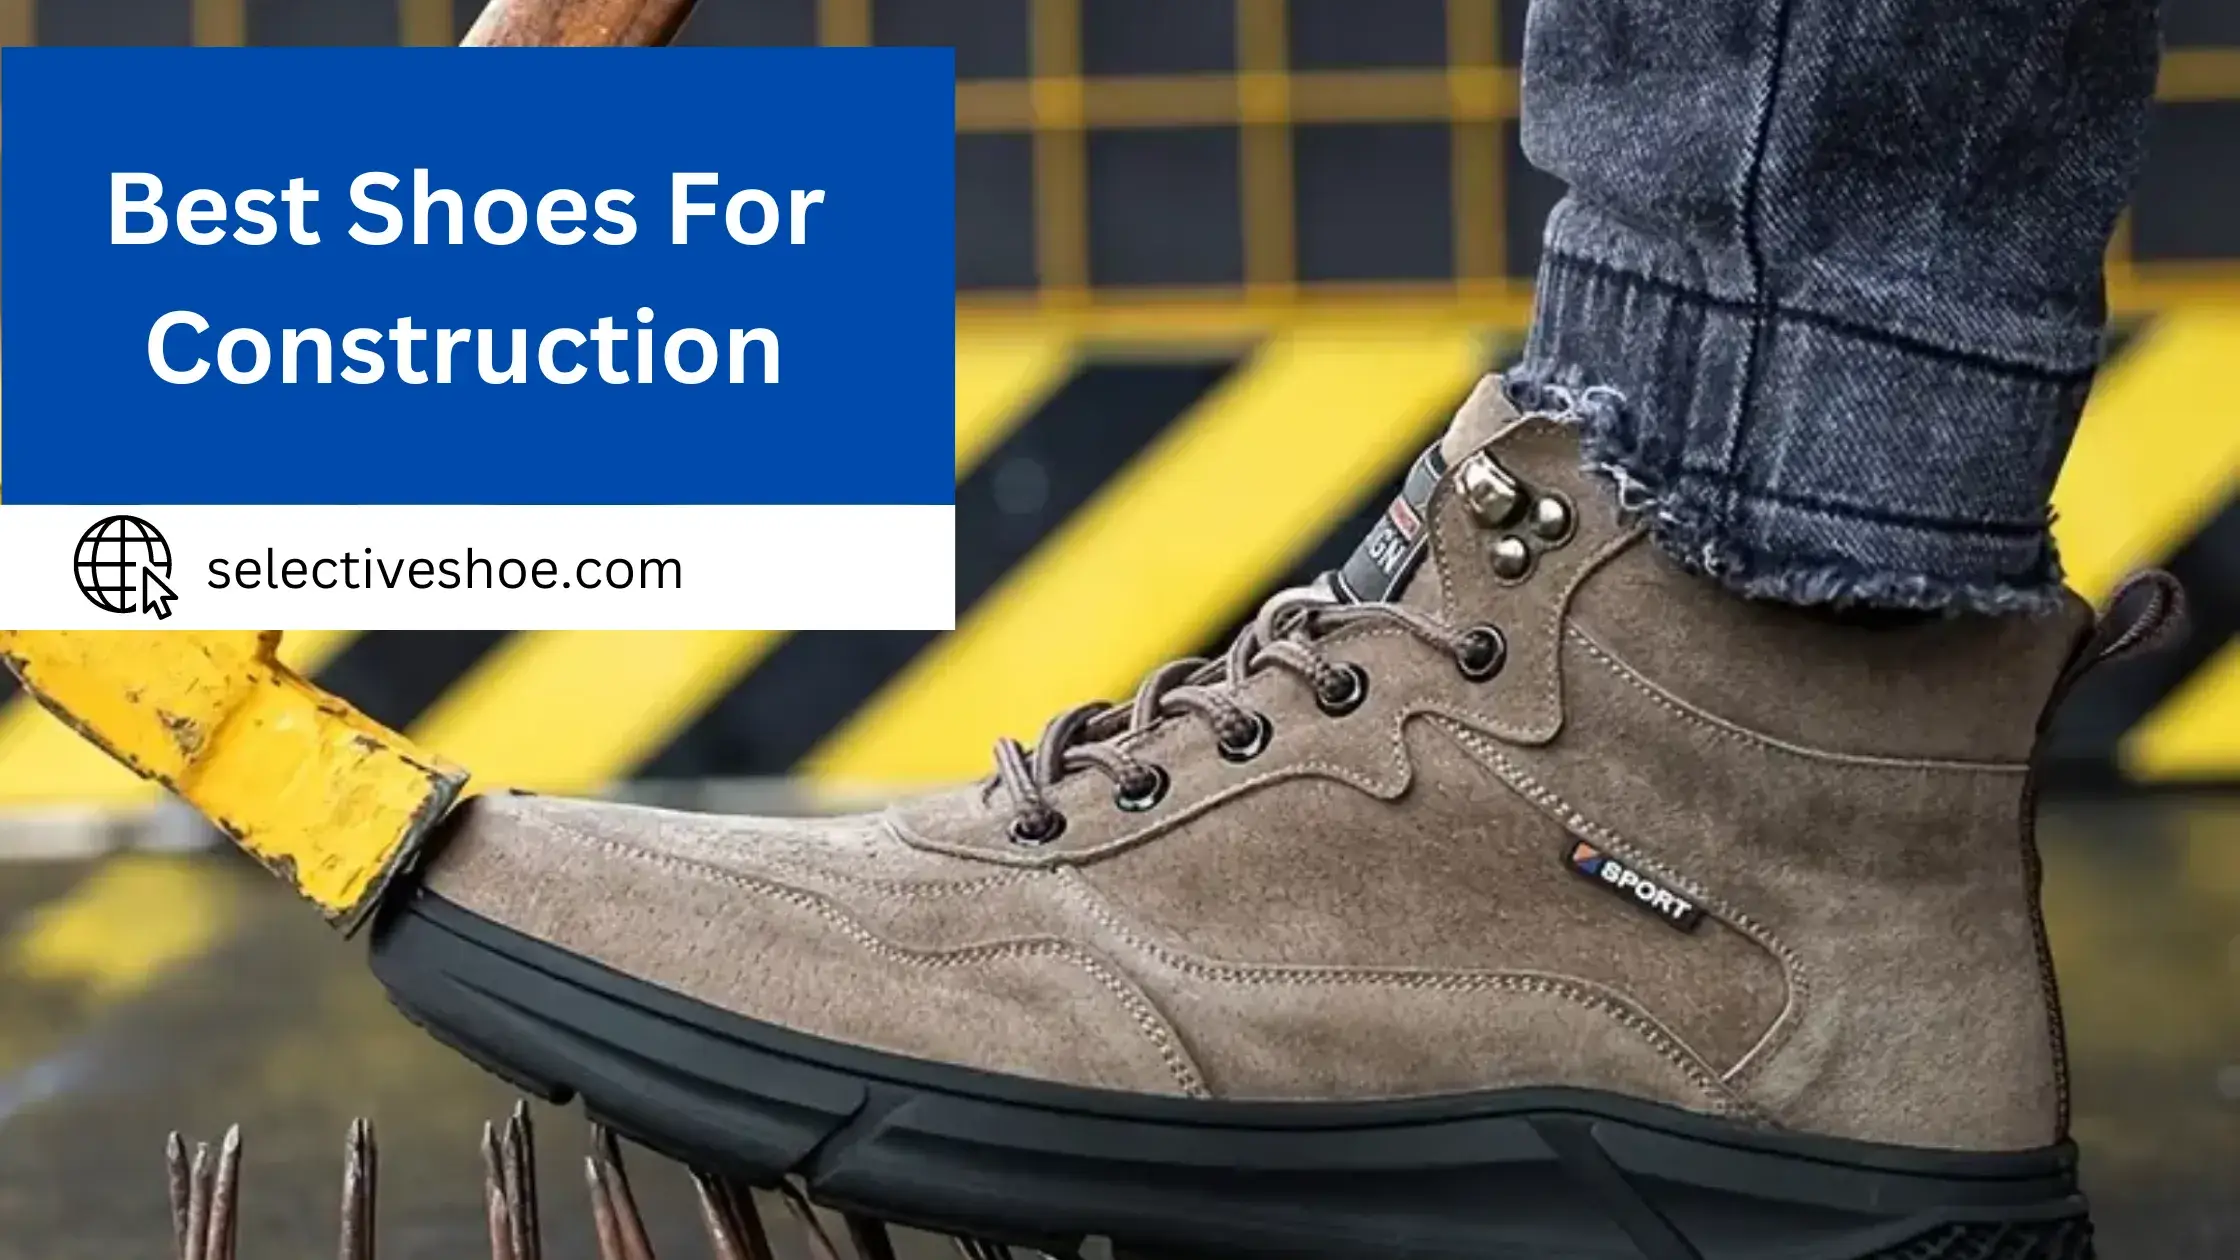 Best Shoes For Construction - A Comprehensive Guide